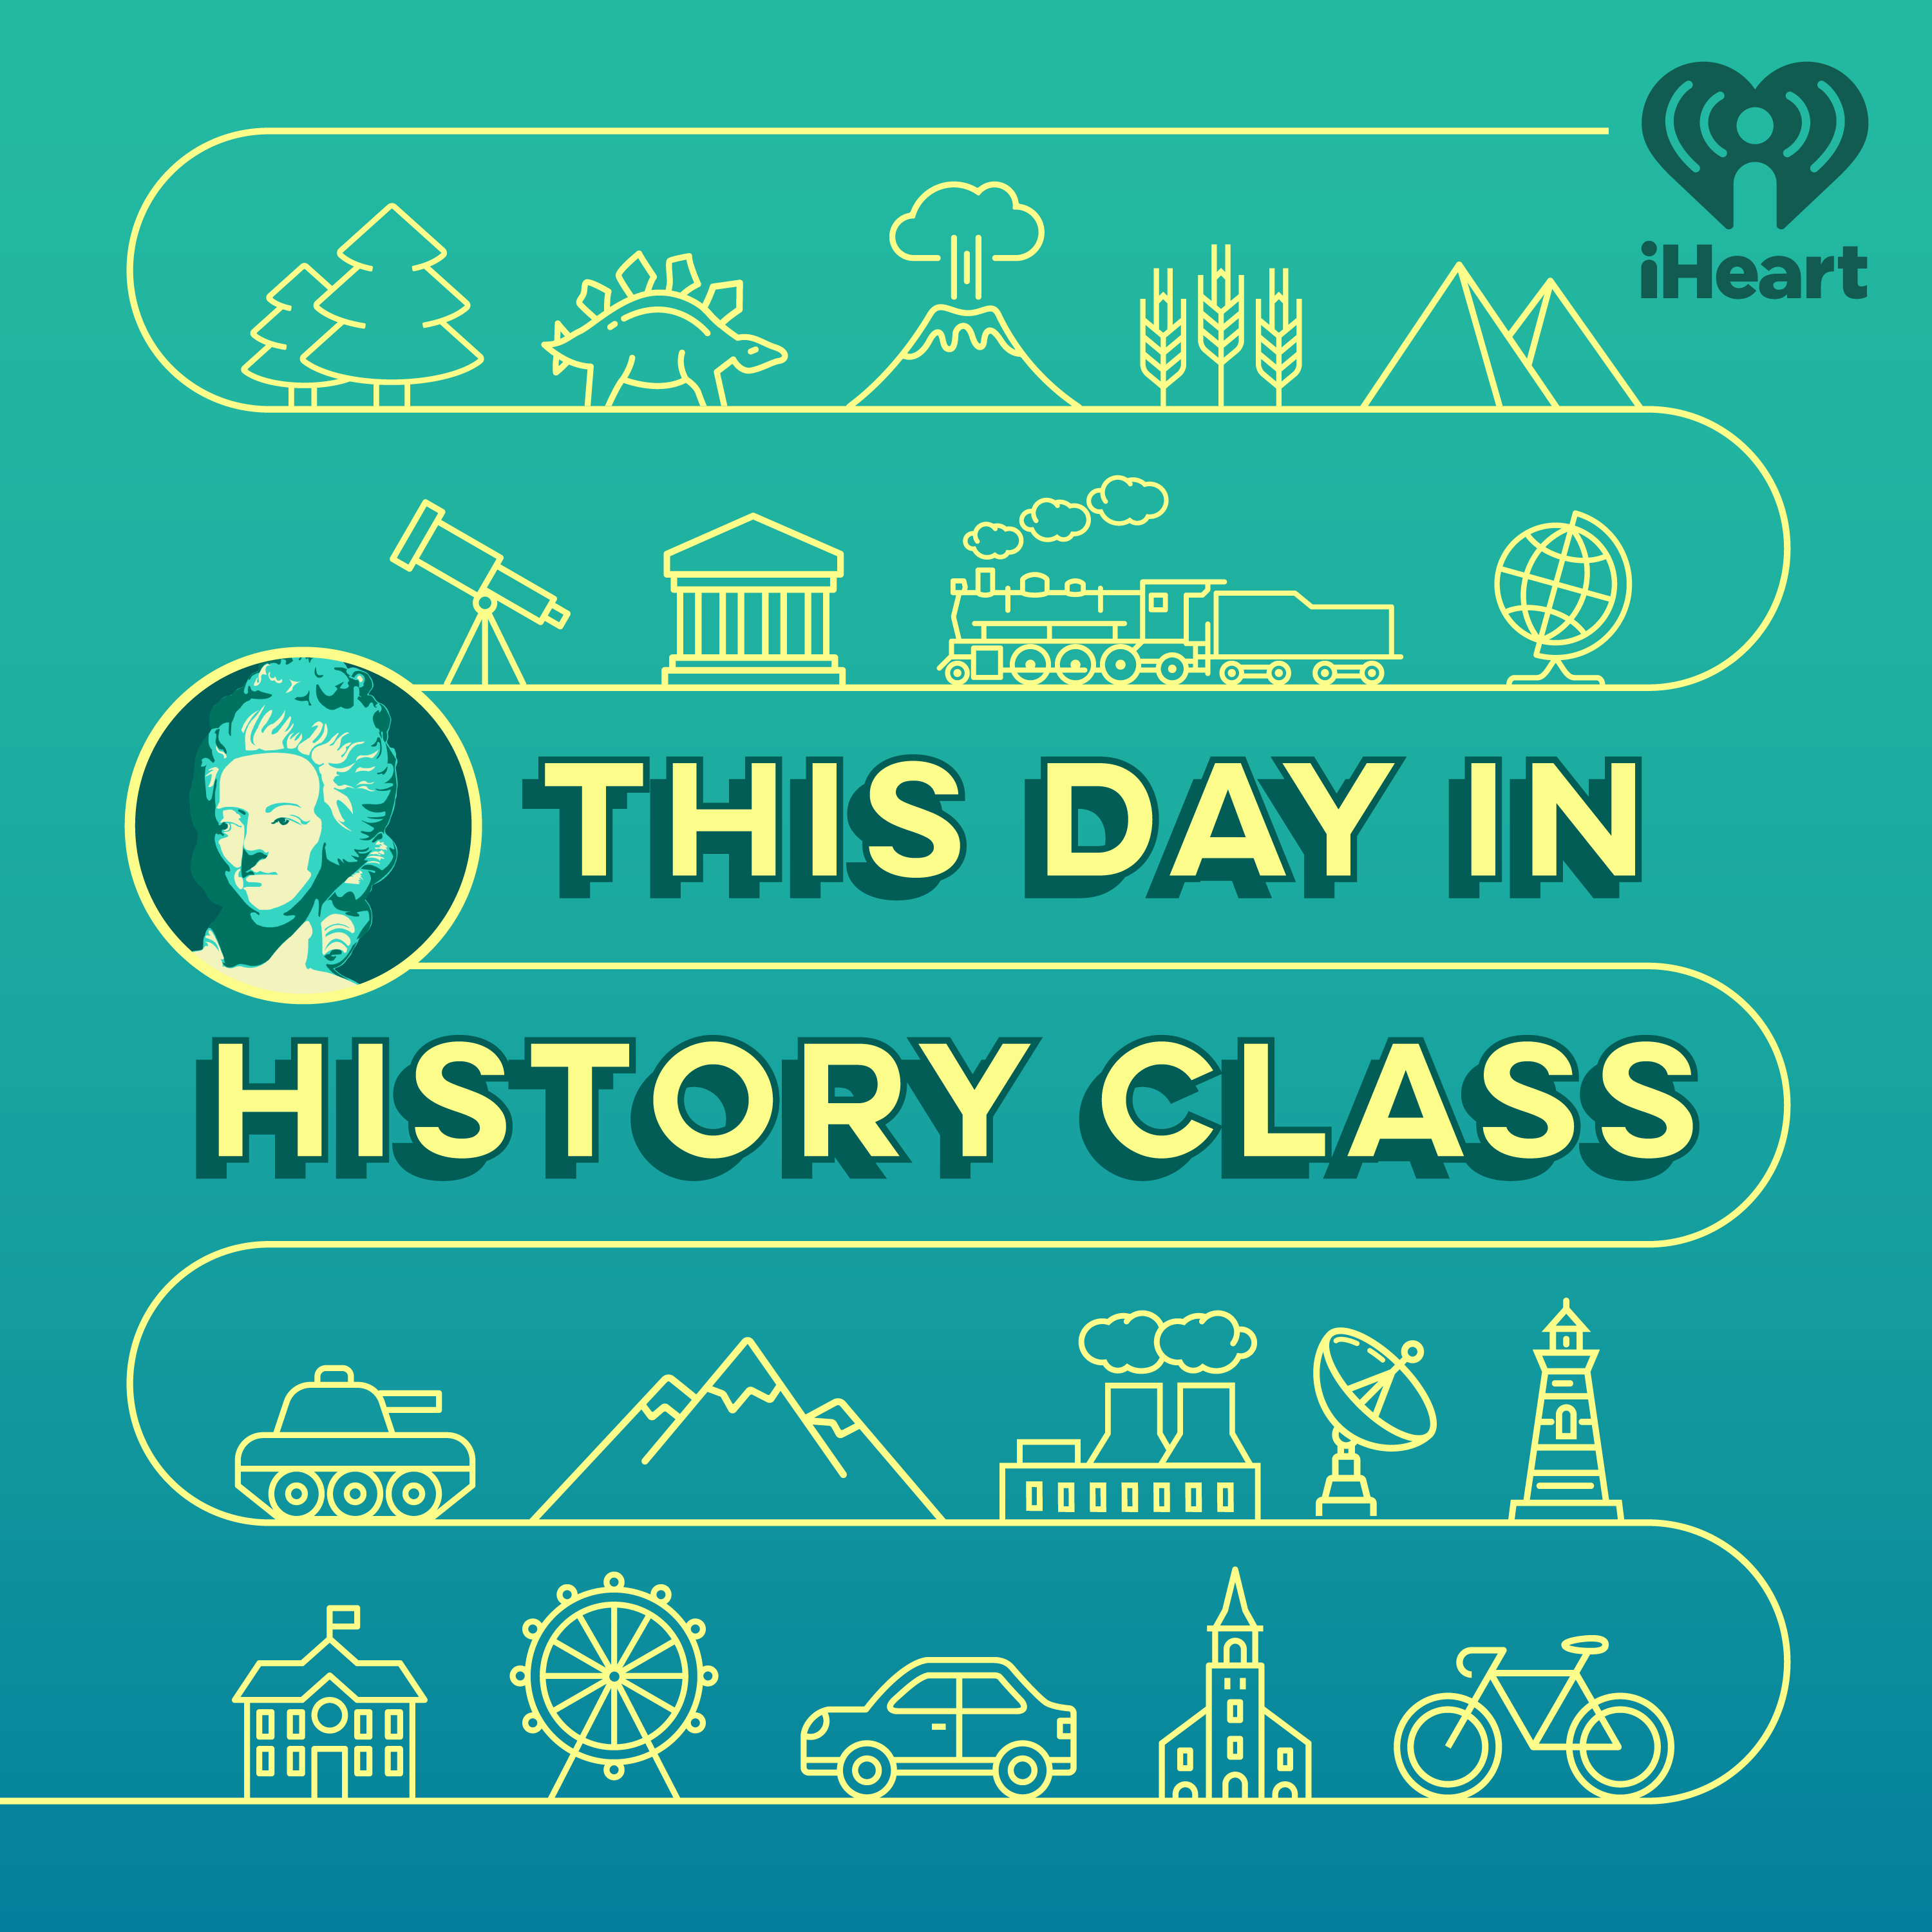 This Day In History Class - December 26th